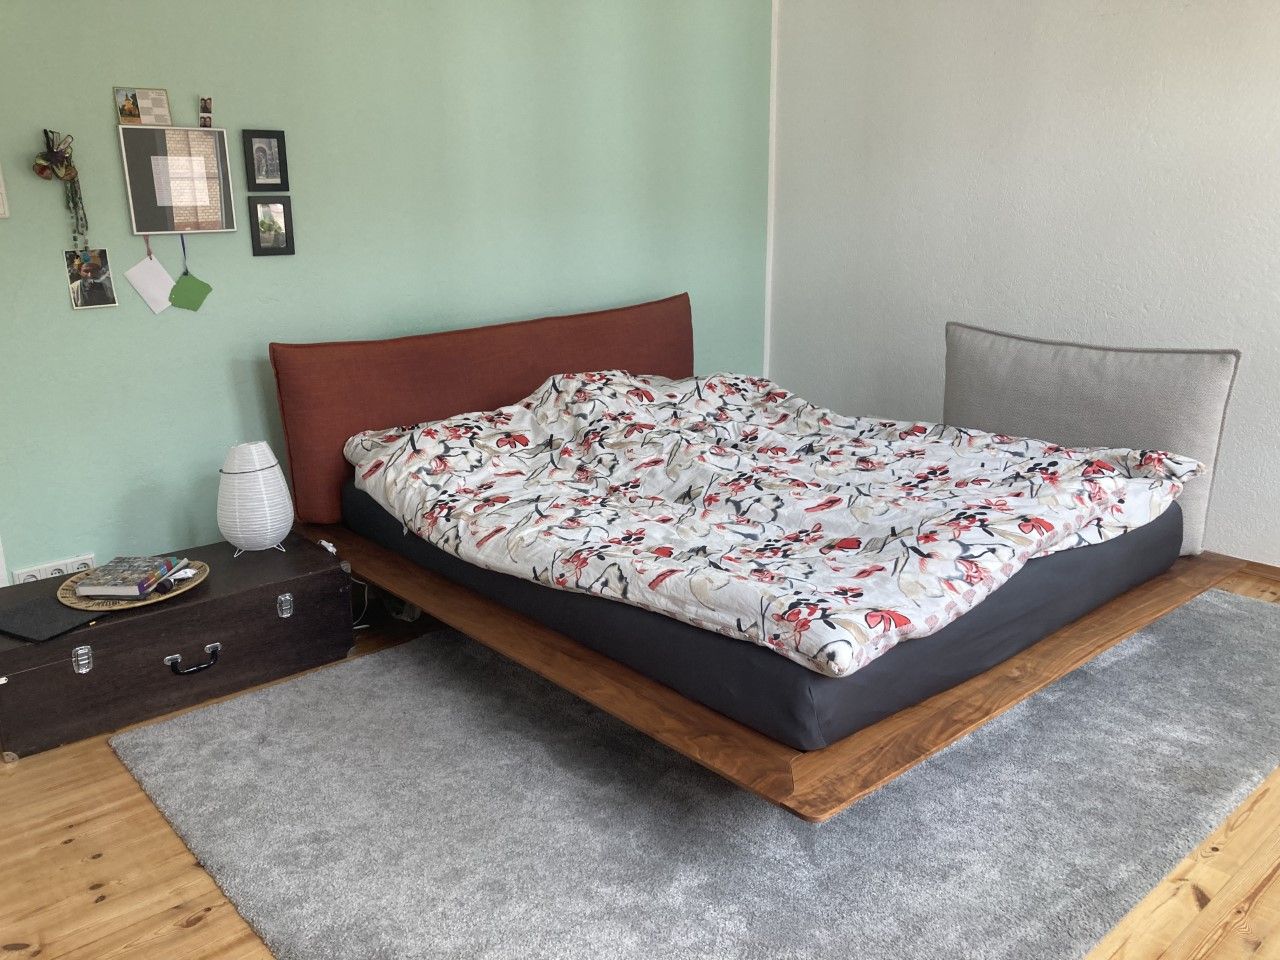 Fully furnished 3 room flat in a renovated old building for 1 year rent, in the heart Frankfurt Bornheim, ideally connected to PT